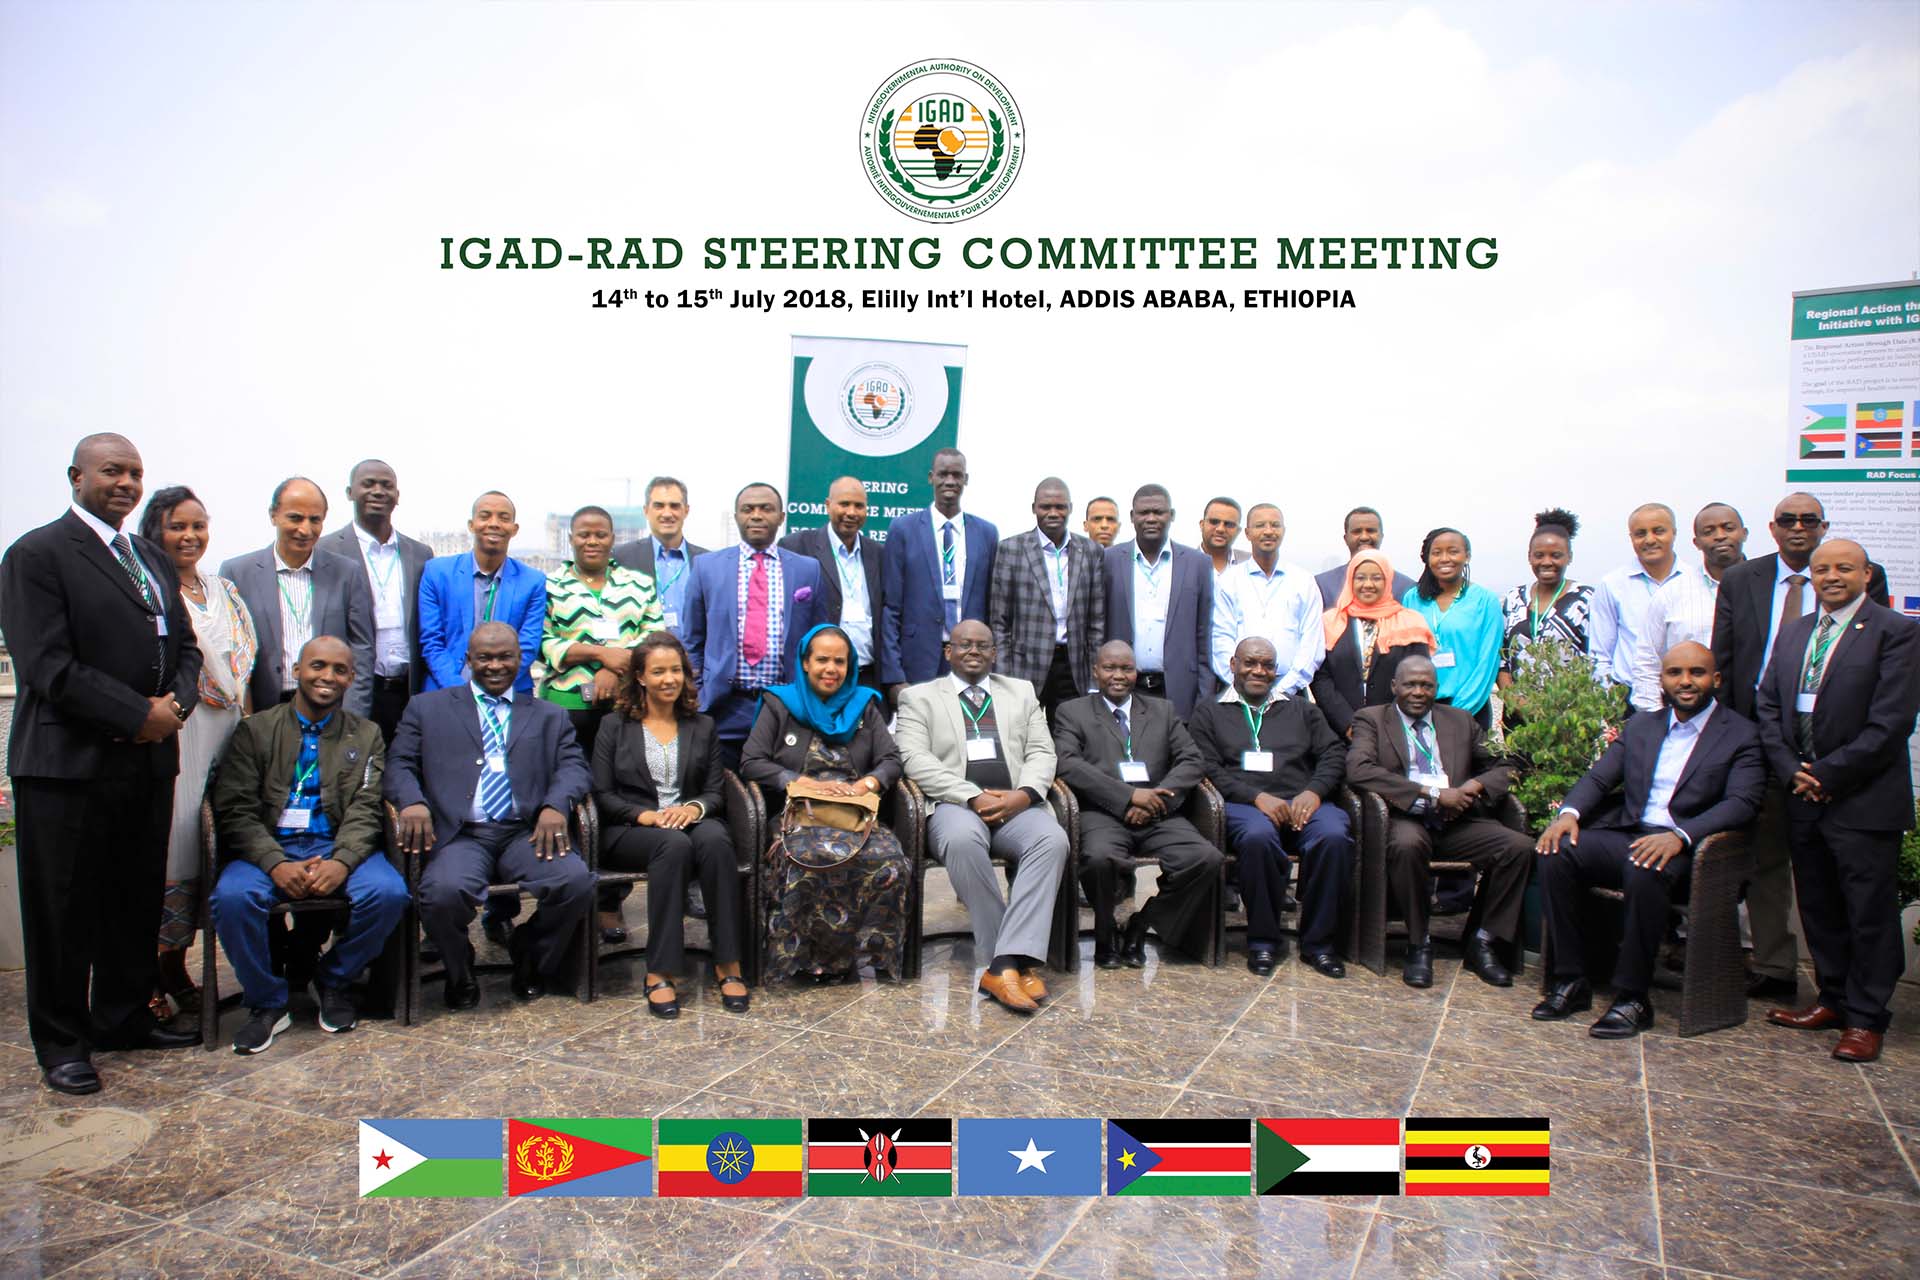 IGAD Health Data Project on its 3rd Steering Committee Meeting